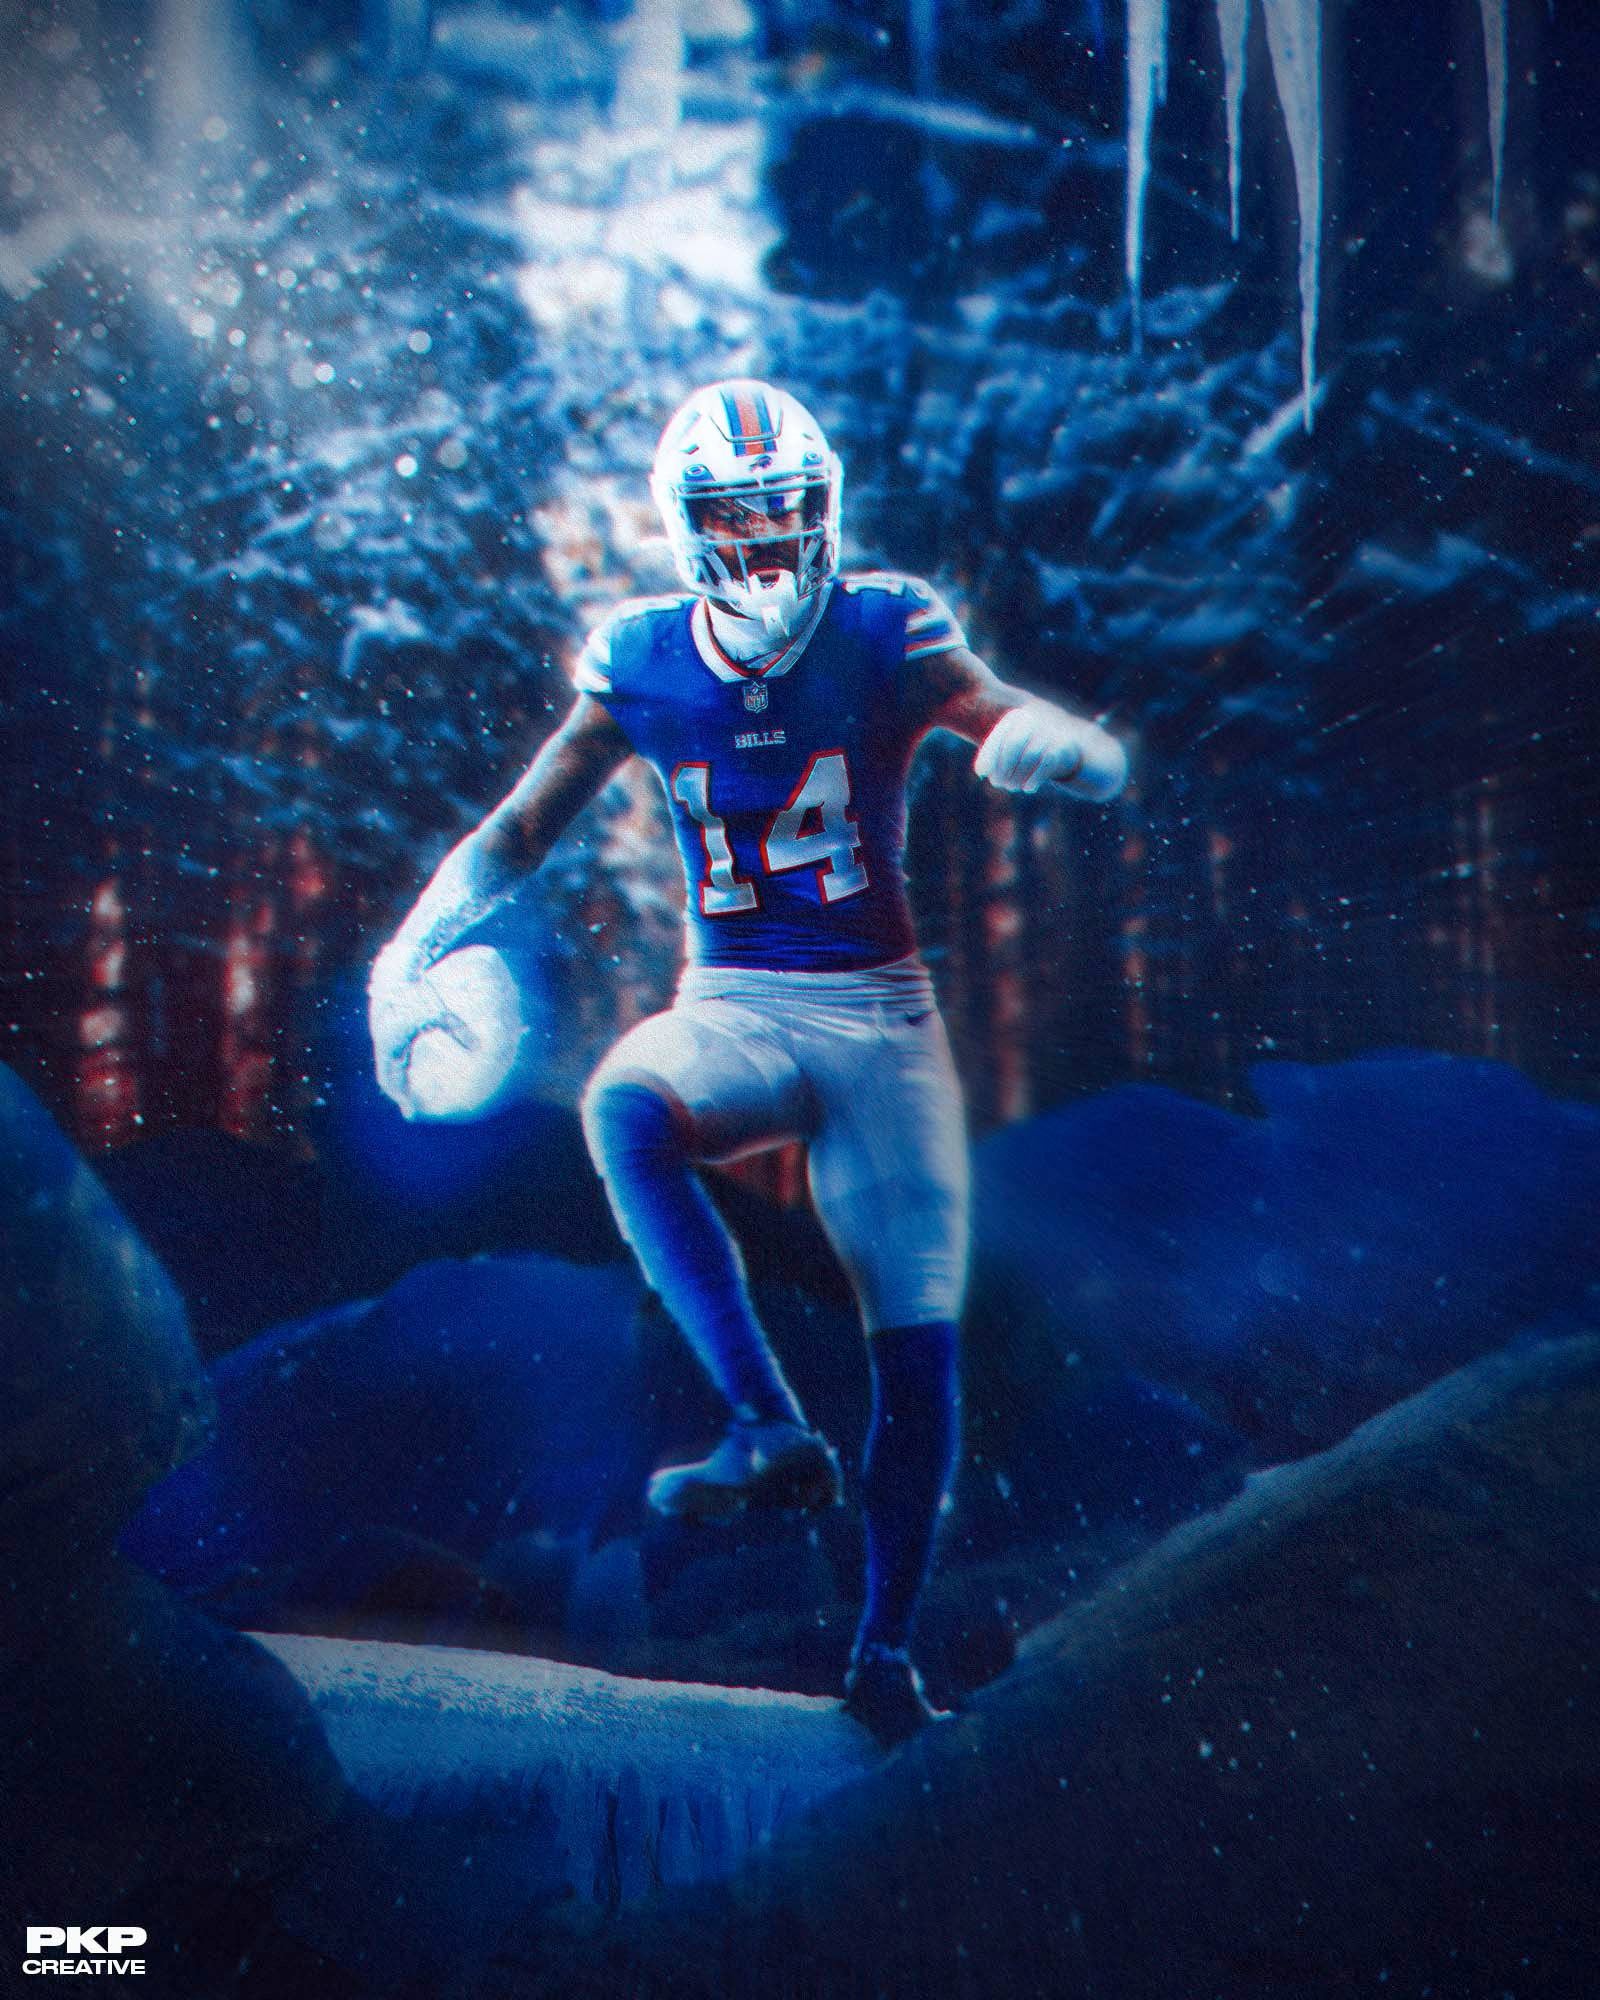 Stefon Diggs Wallpapers